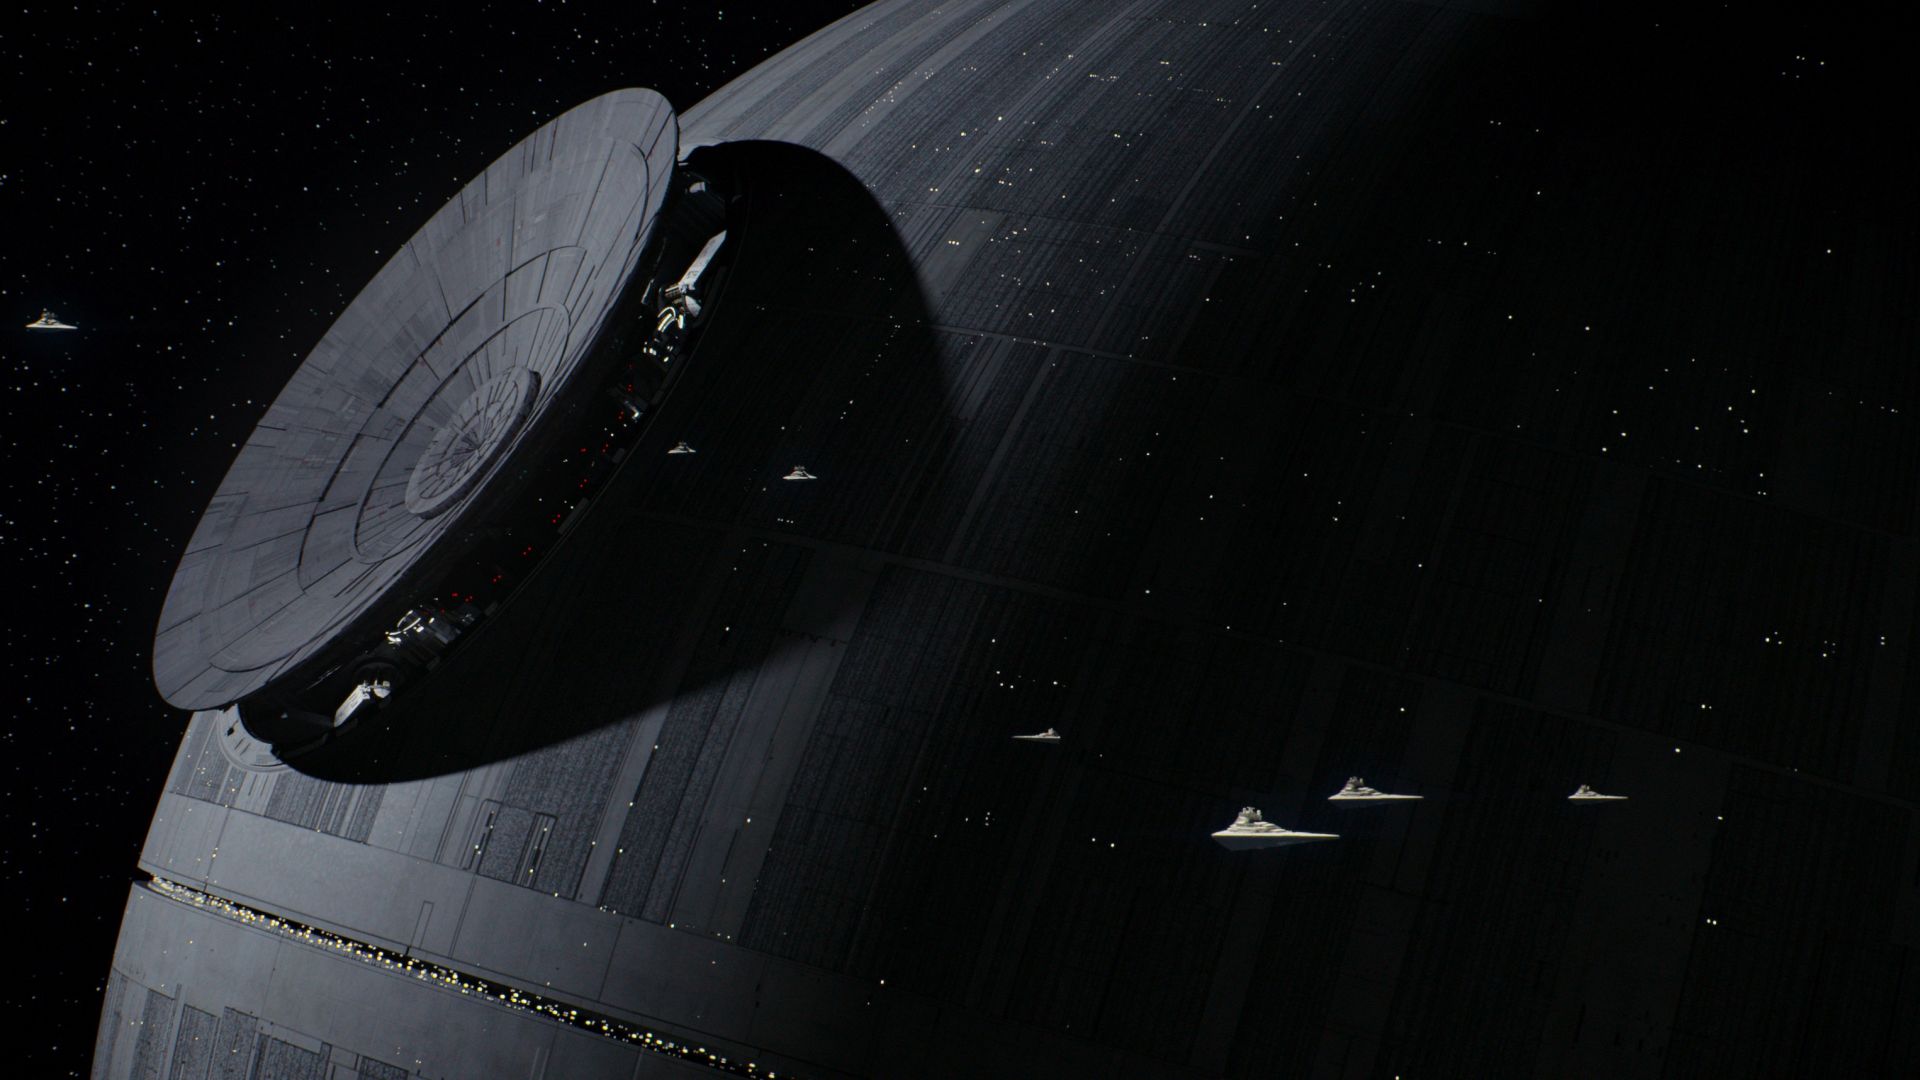 Rogue One: A Star Wars Story, star ship, Best Movies of 2016 (horizontal)